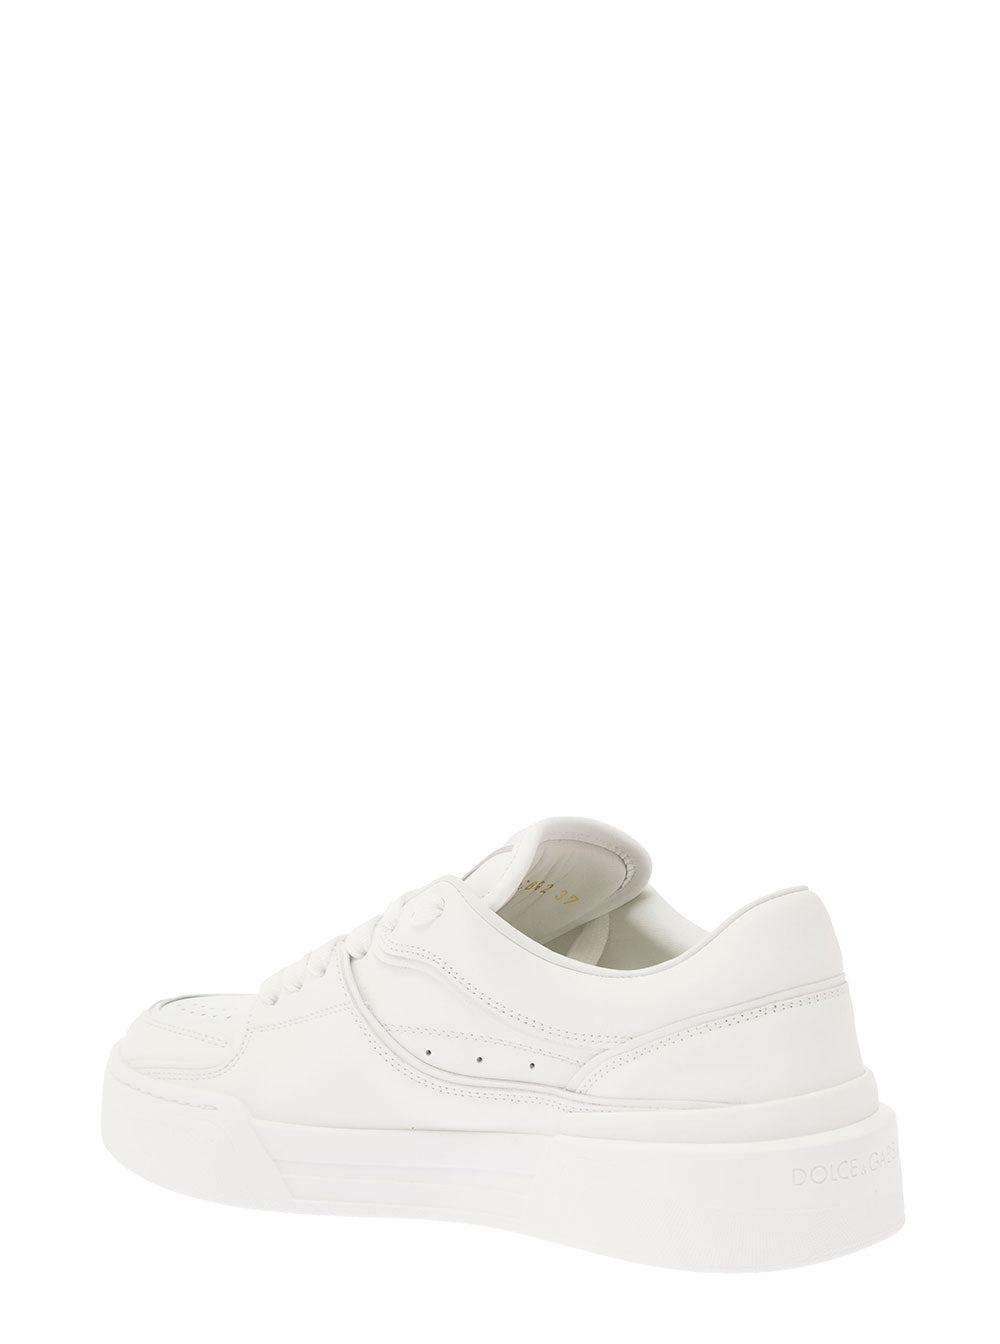 Dolce & Gabbana New Roma Sneaker in White - Save 26% | Lyst